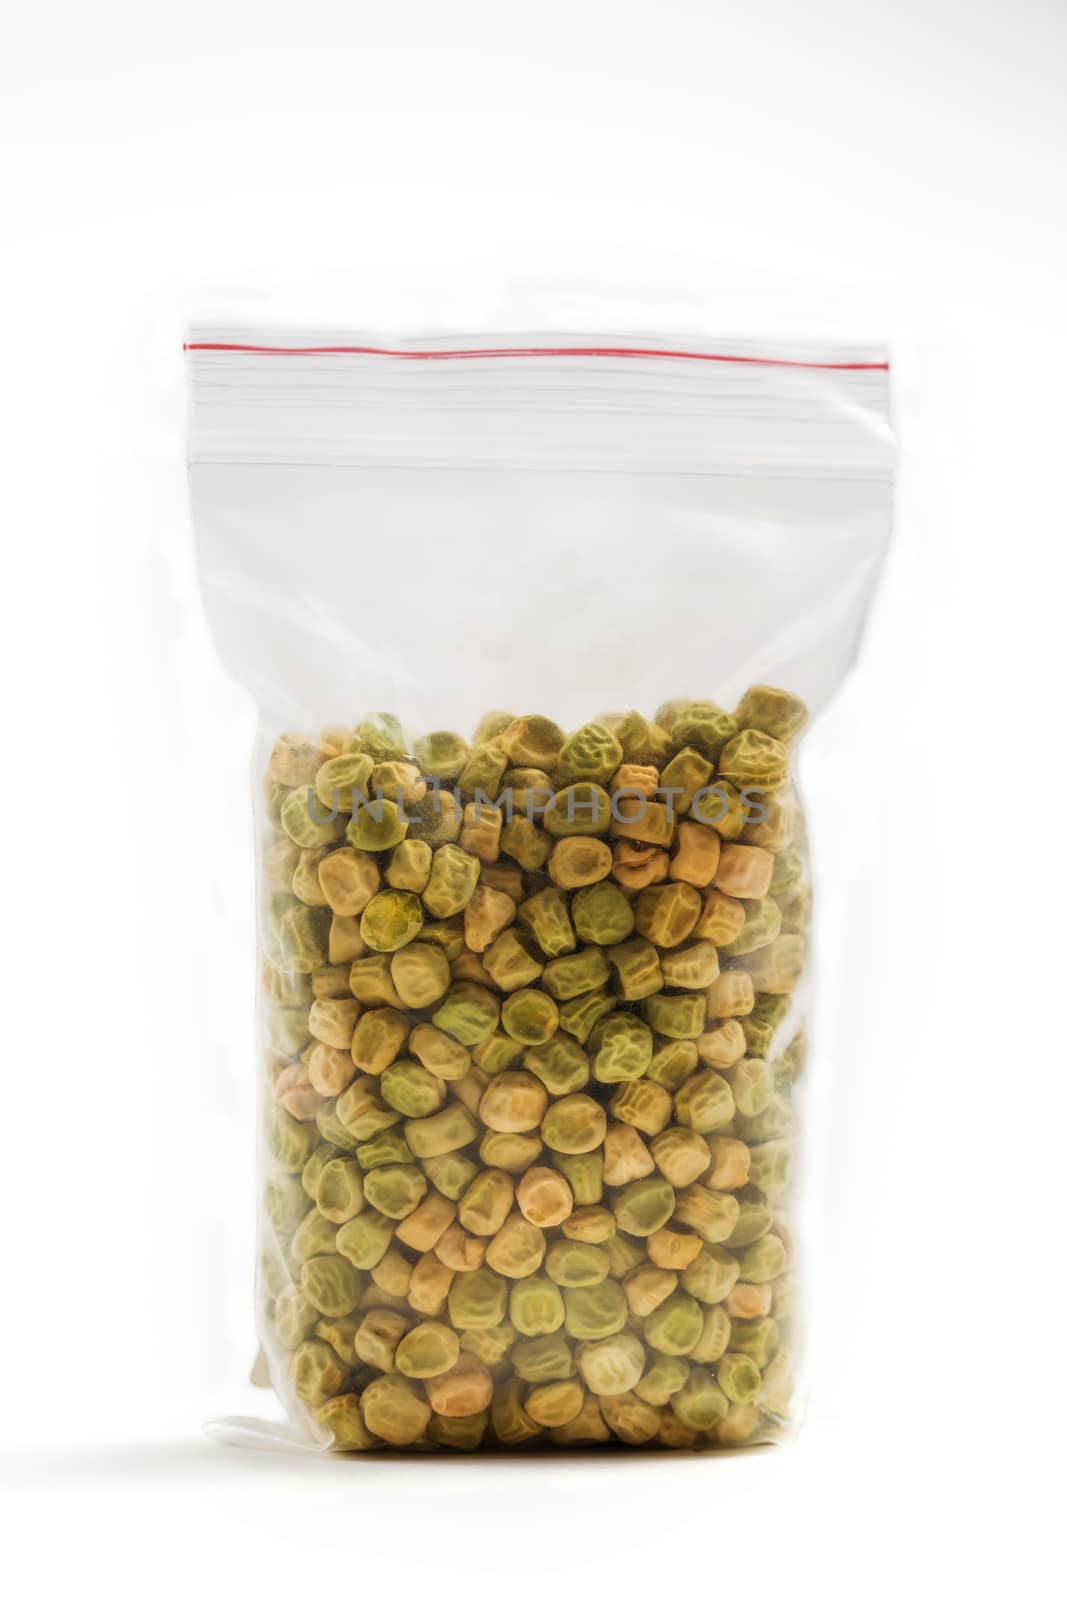 Dry pea seeds for germination isolated on a white background by galinasharapova